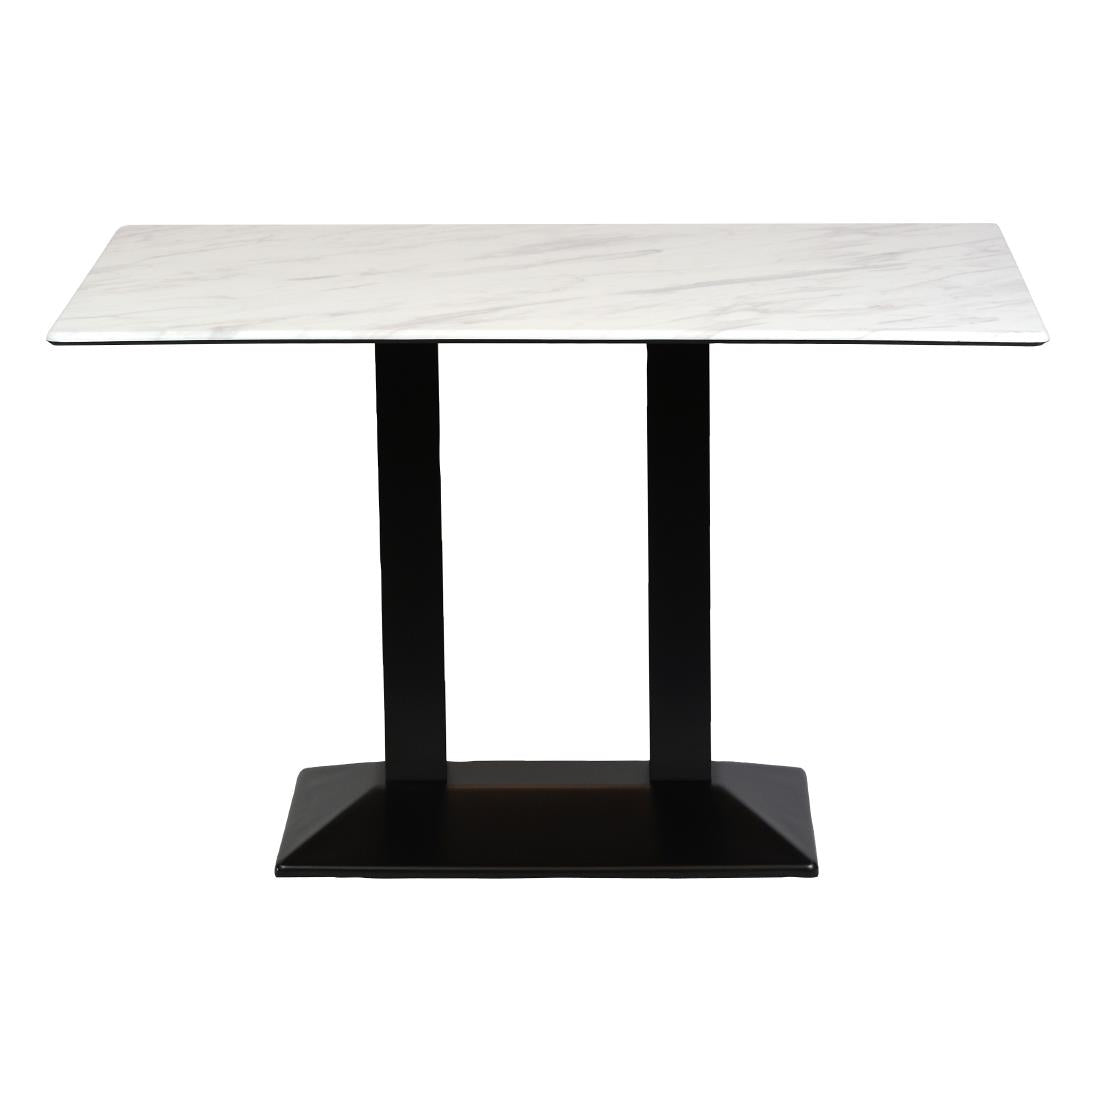 CZ822 Turin Metal Base Rectangular Dining Table with Laminate Top Marble 1200x700mm JD Catering Equipment Solutions Ltd